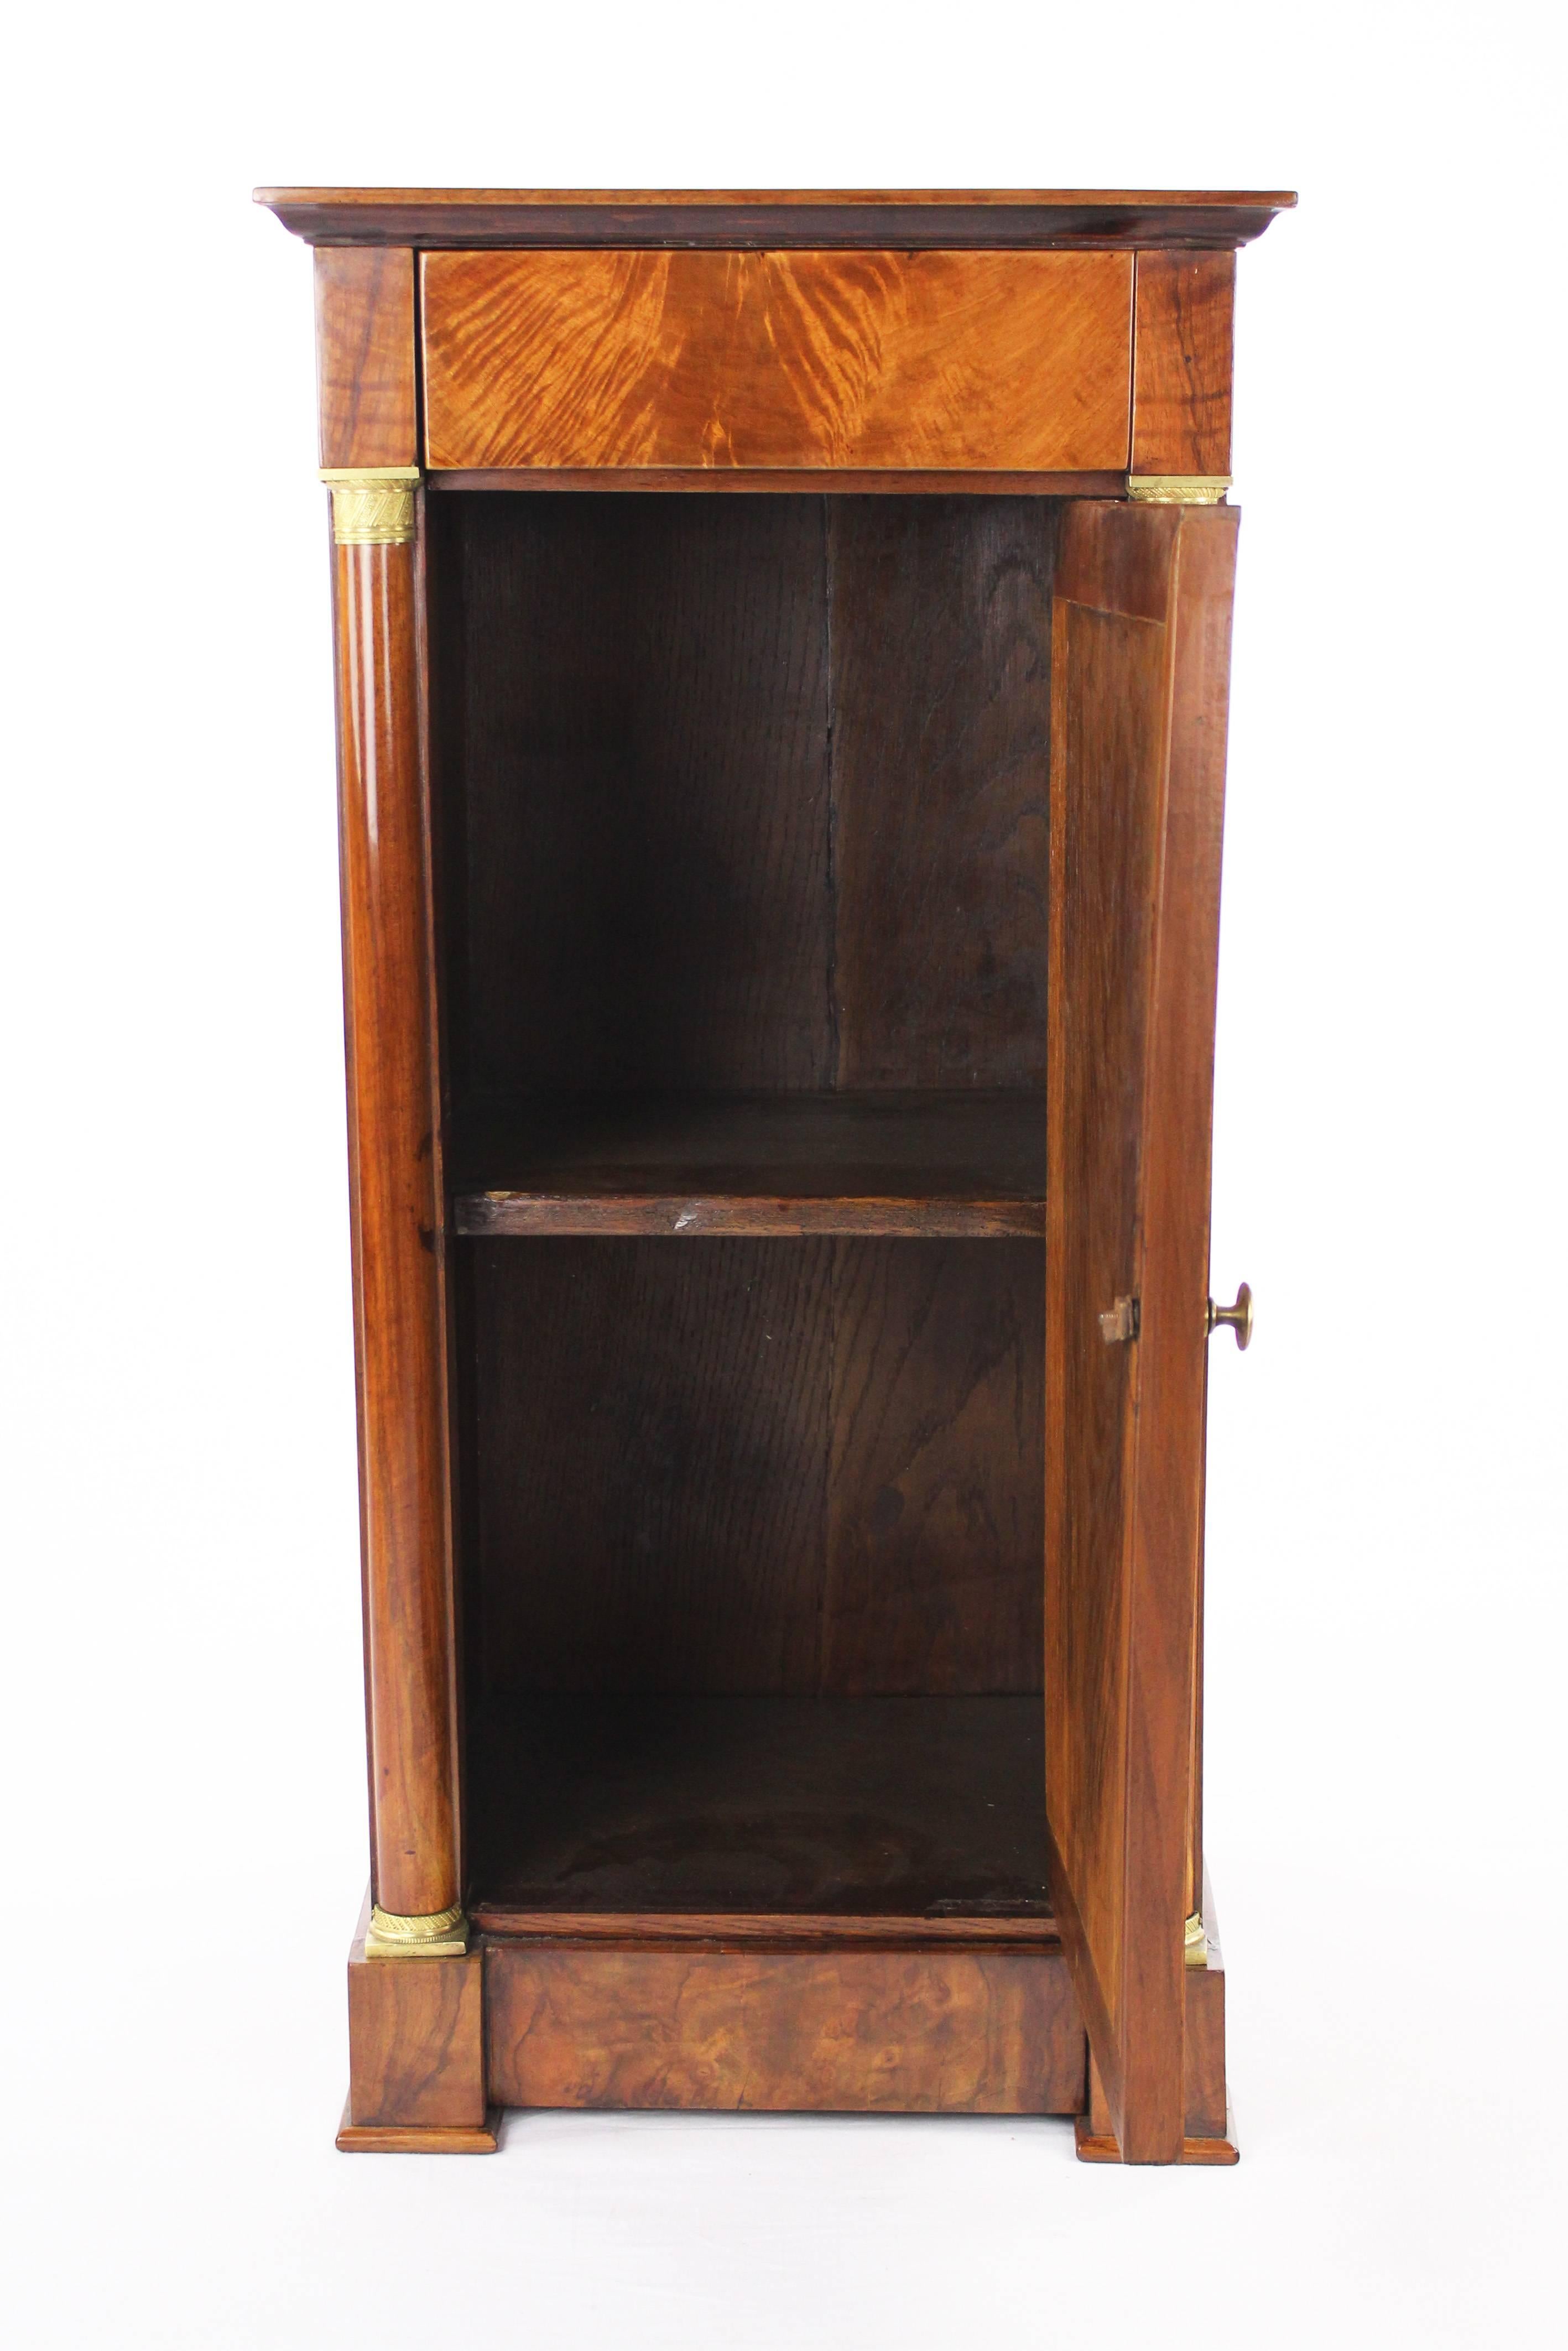 Pillar cupboard, circa 1820
Walnut-tree veneered
Nice reflected veneer
One concealed push
One double door
Restored residential-ready state
French hand shellac polish
Measure: Height 80 cm, width 39 cm, depth 38.5 cm.

Delivery can be made